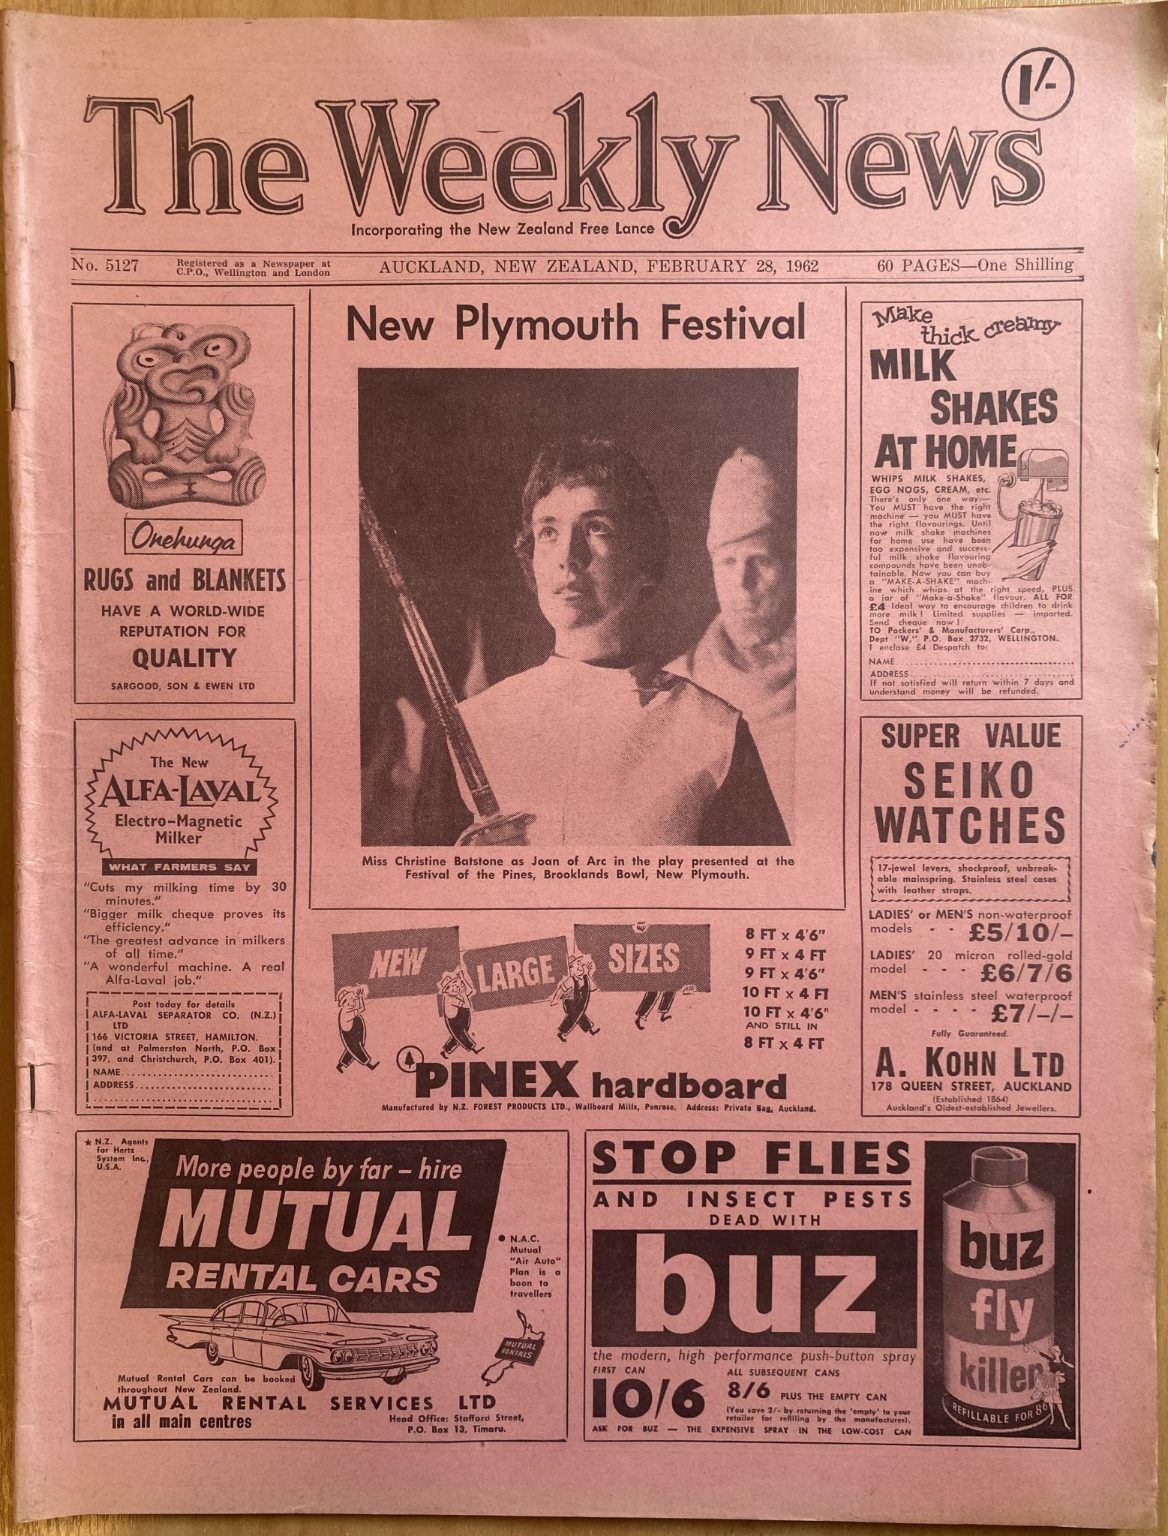 OLD NEWSPAPER: The Weekly News, No. 5127, 28 February 1962